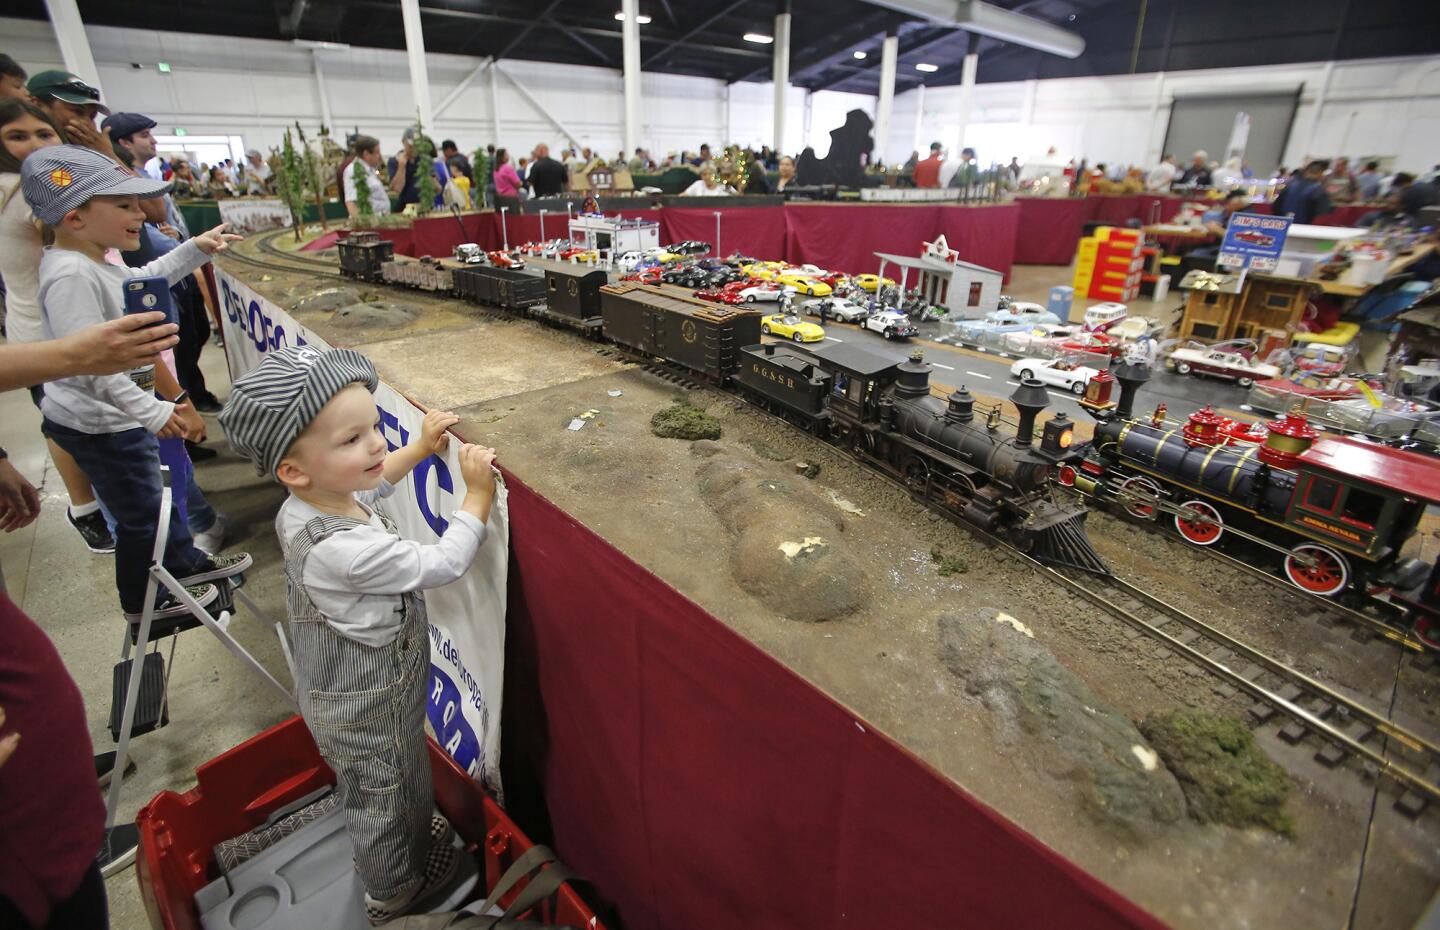 Ben Roberts, dressed in conductor gear, watches as two engines roll by compliments of the Del Oro Pacific large scale modular railroad display during the Great Train Show at the OC Fair and Events Center on Saturday.